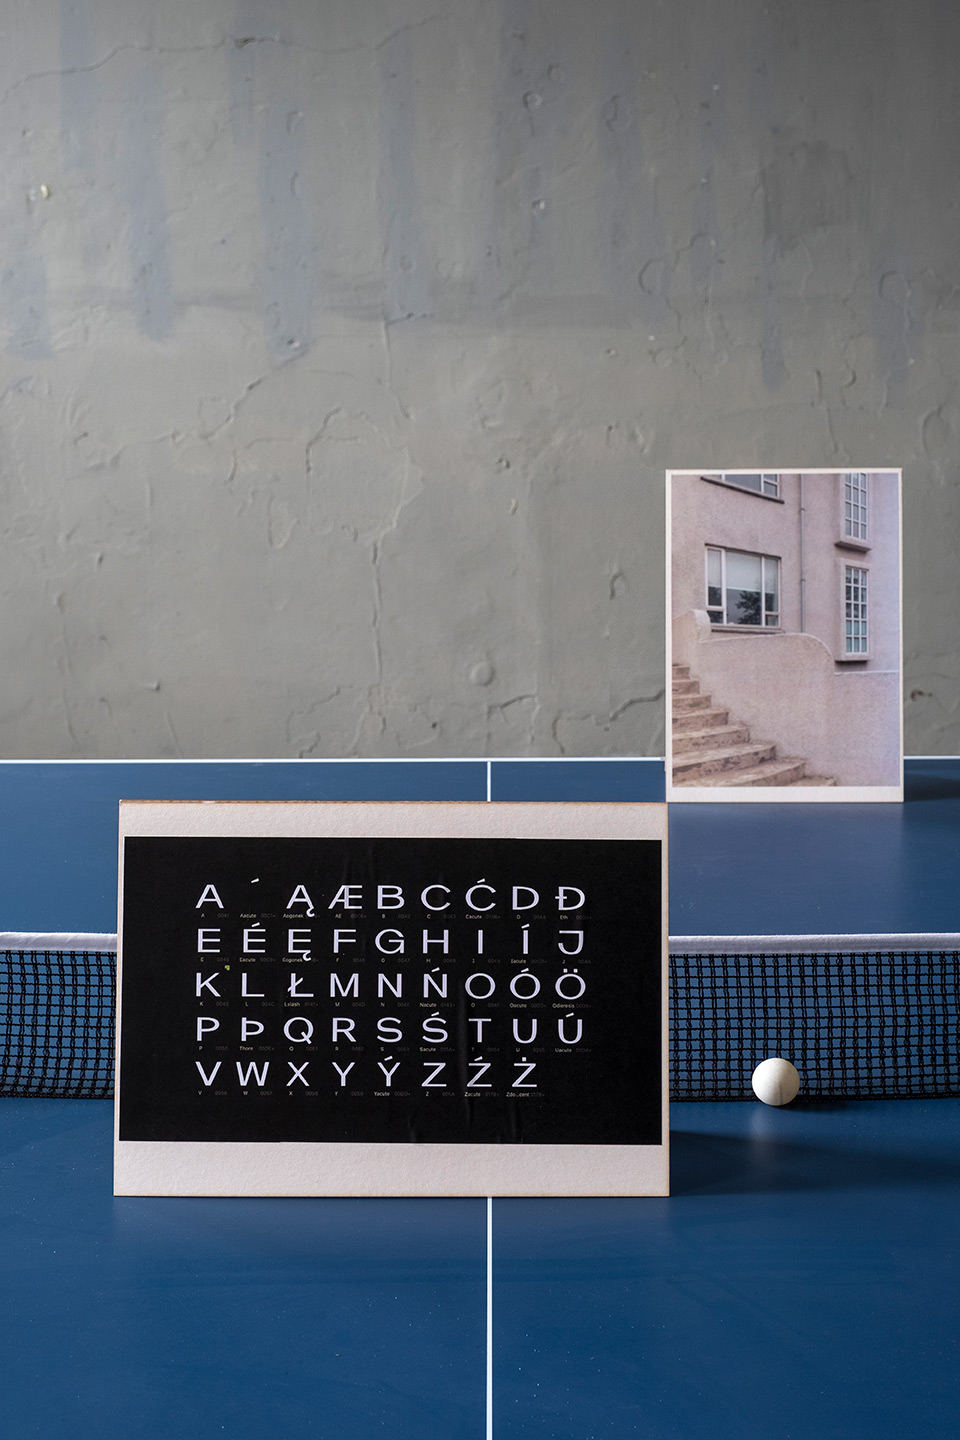 Cards with photos of Icelandic architecture and letters printed in Icelandic. The cards are placed on a tennis table.